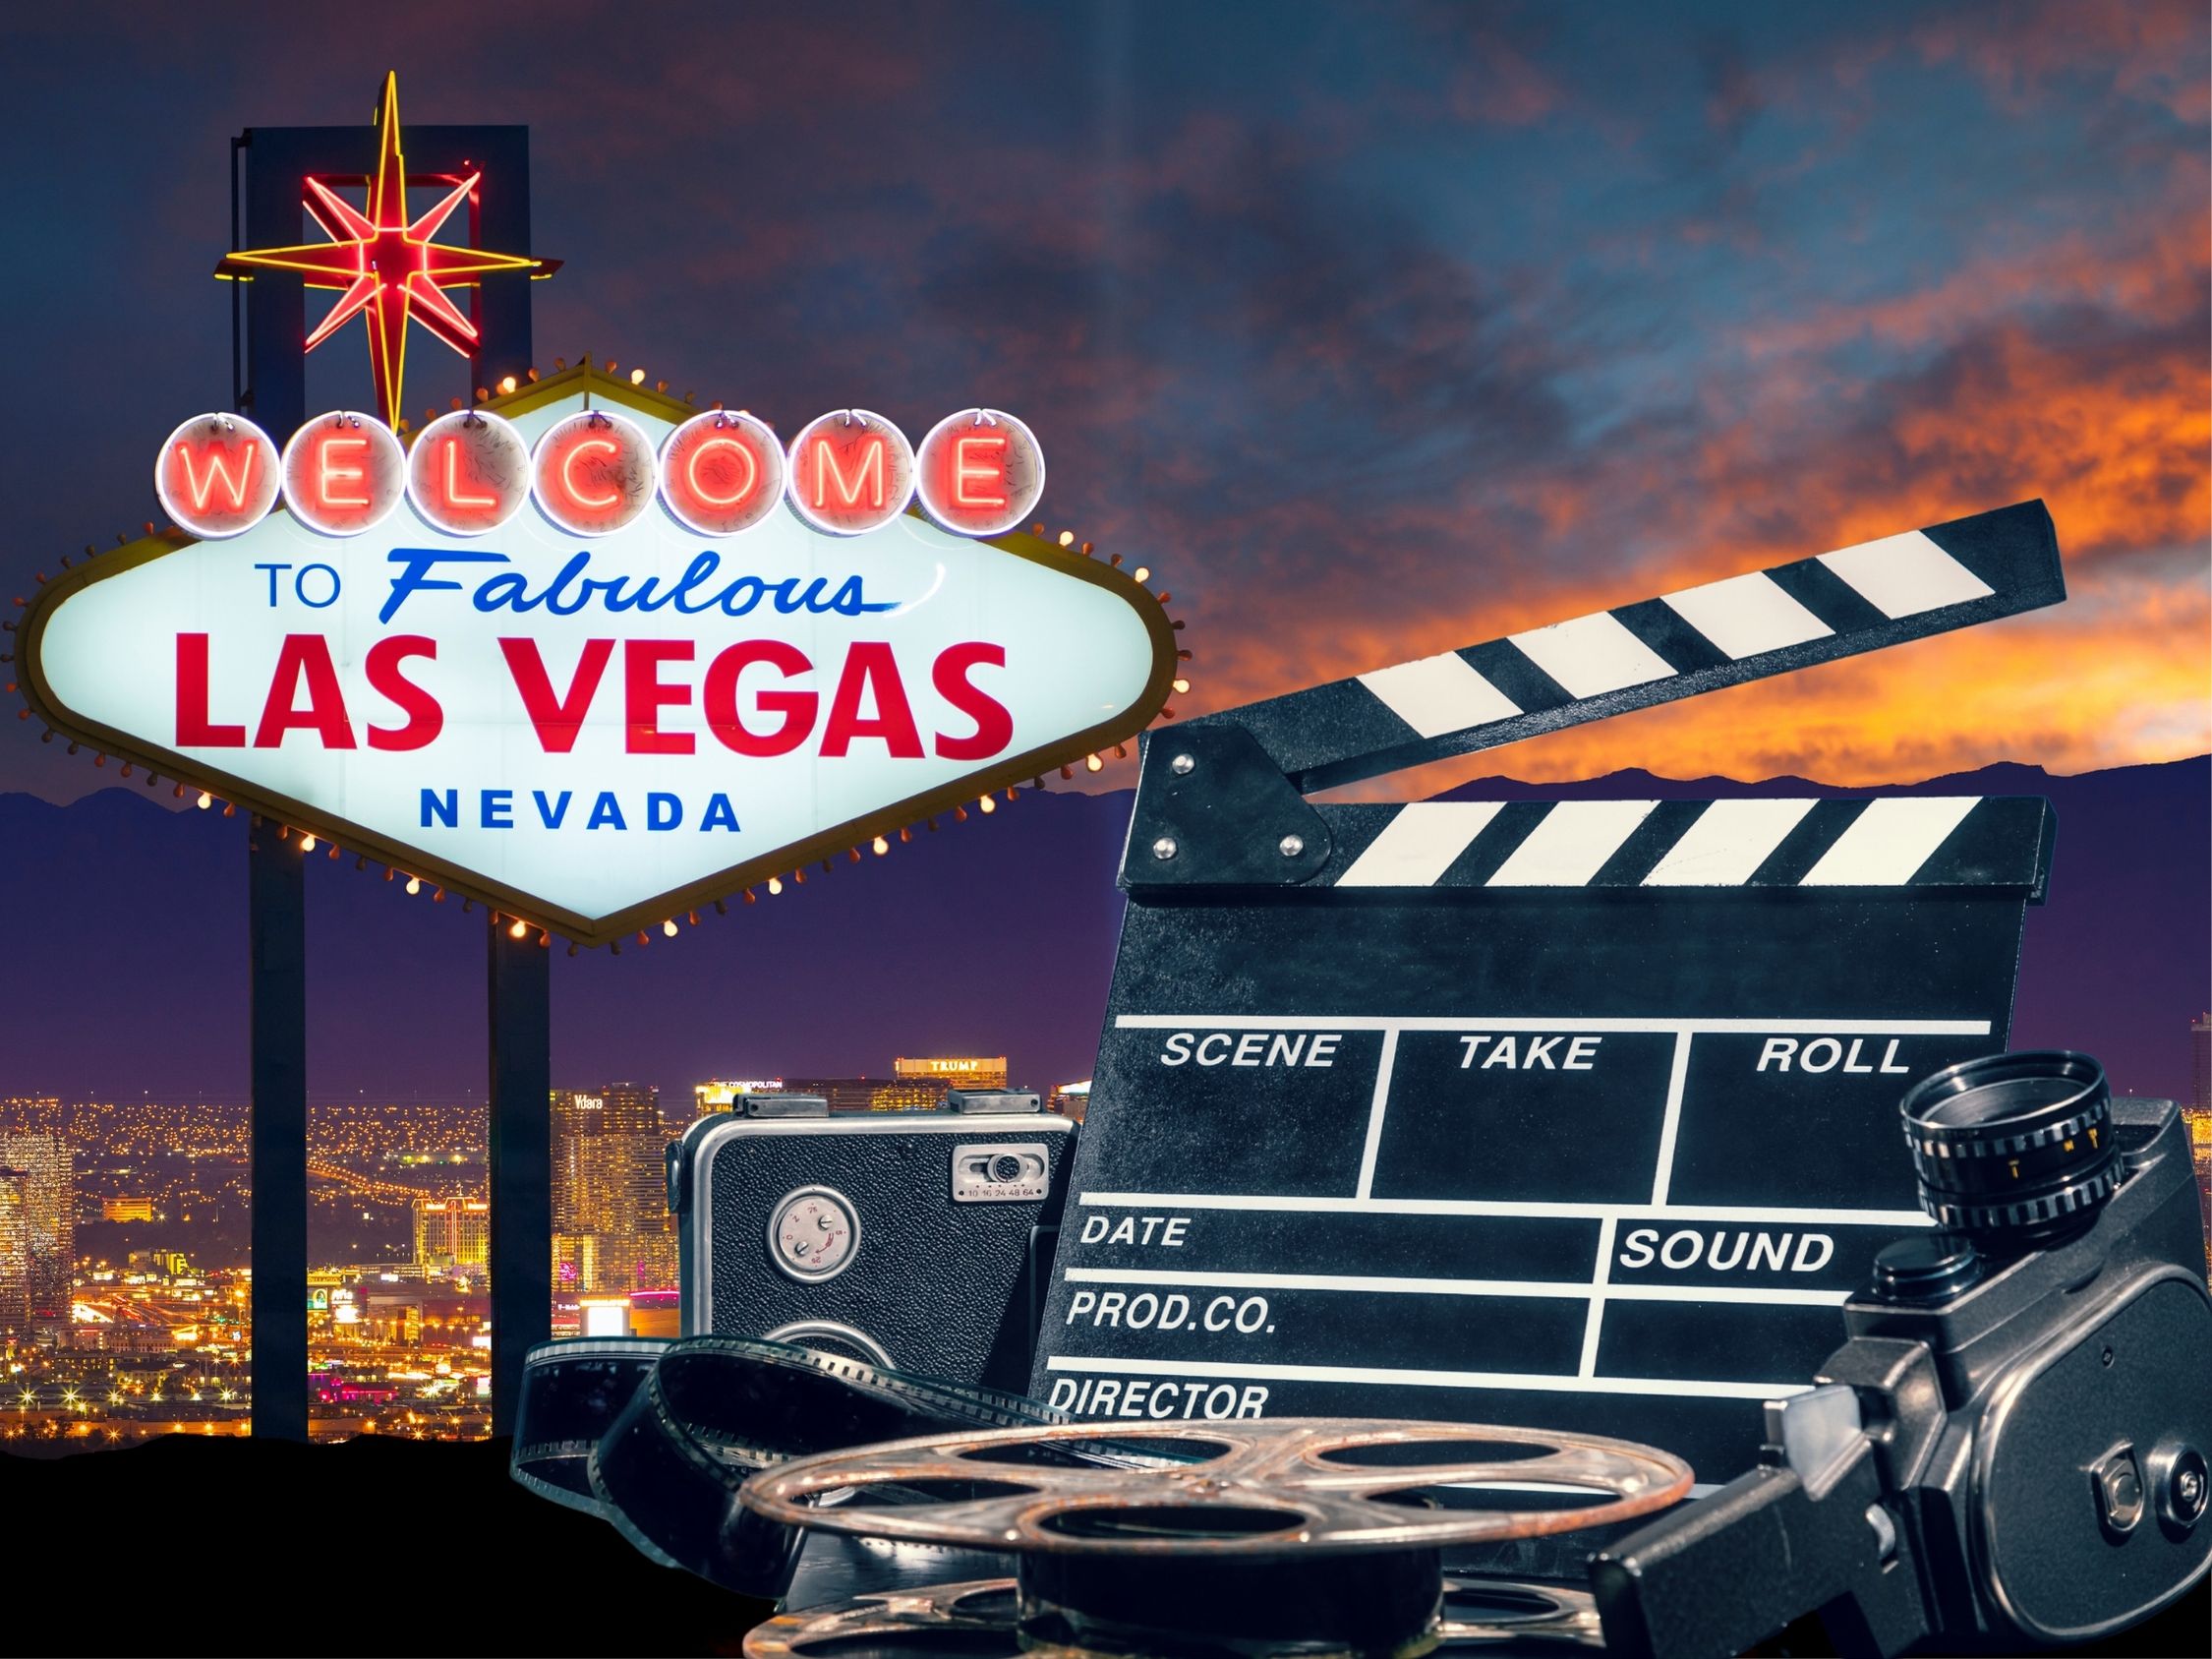 13 Extraordinary Movies Set In Las Vegas That Will Inspire You To Visit!